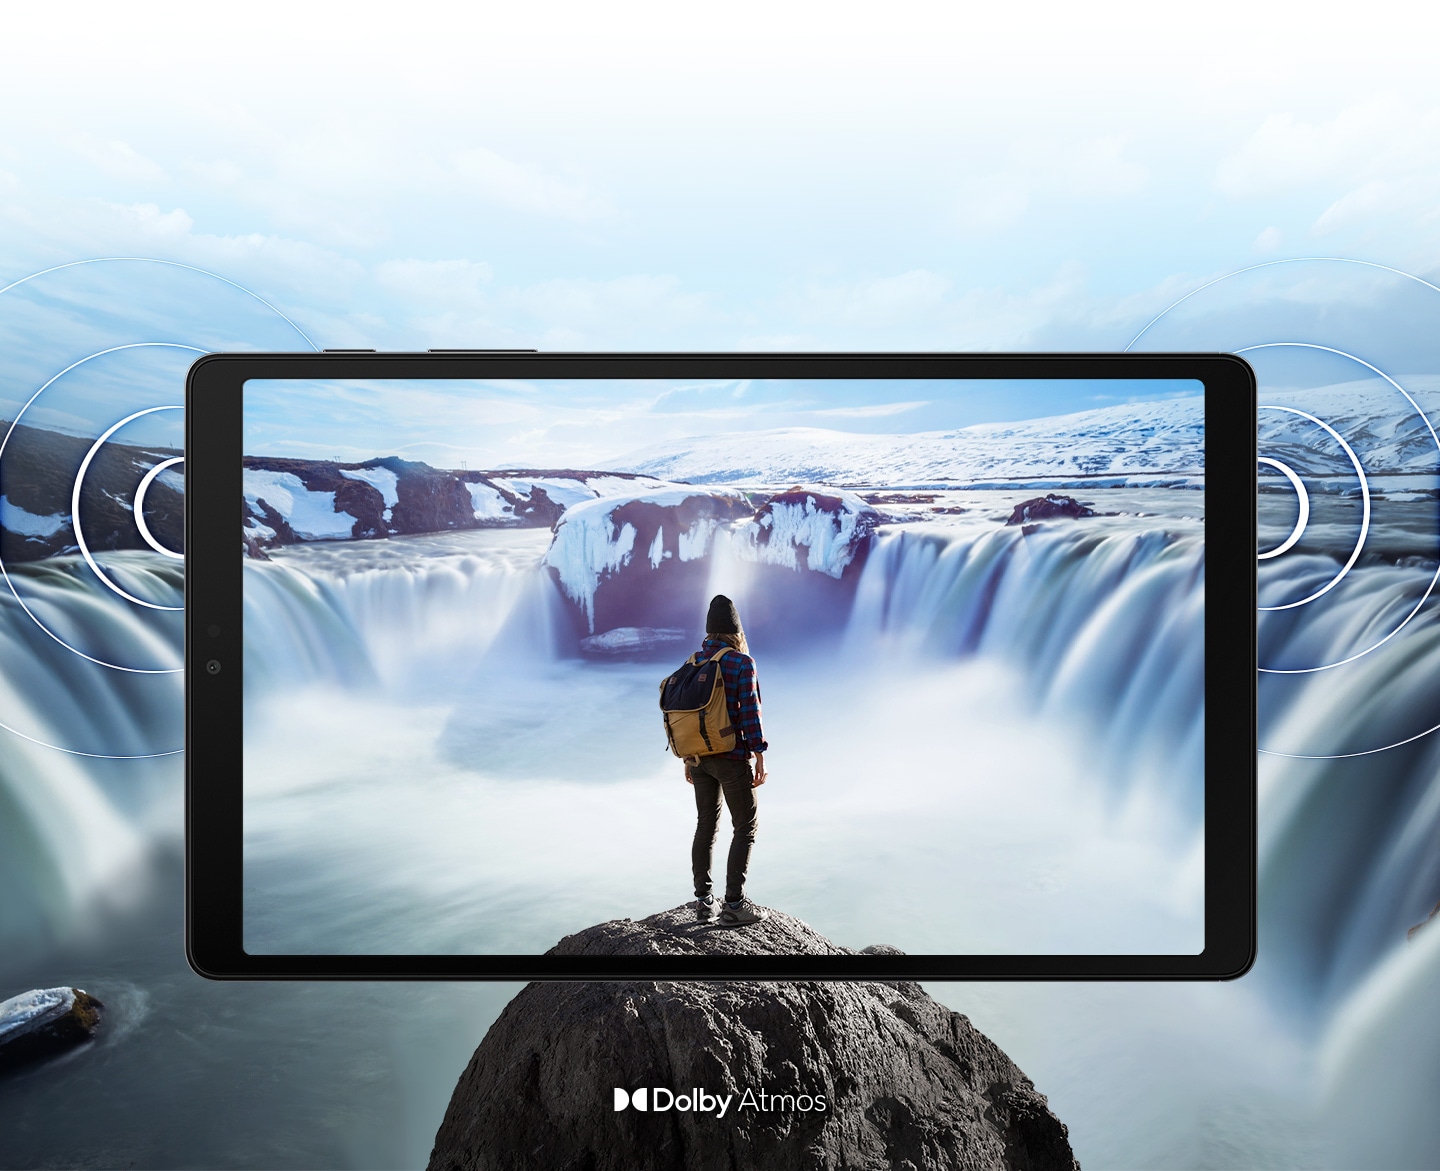 'Galaxy A7 Lite seen from the front with an image of a person standing on a rock in front of steaming waterfalls on either side onscreen. The image expands past the edges of the tablet to show the expansiveness of the display. Rings come out from the sides to demonstrate the location of the dual speakers and the immersive sound of Dolby Atmos.